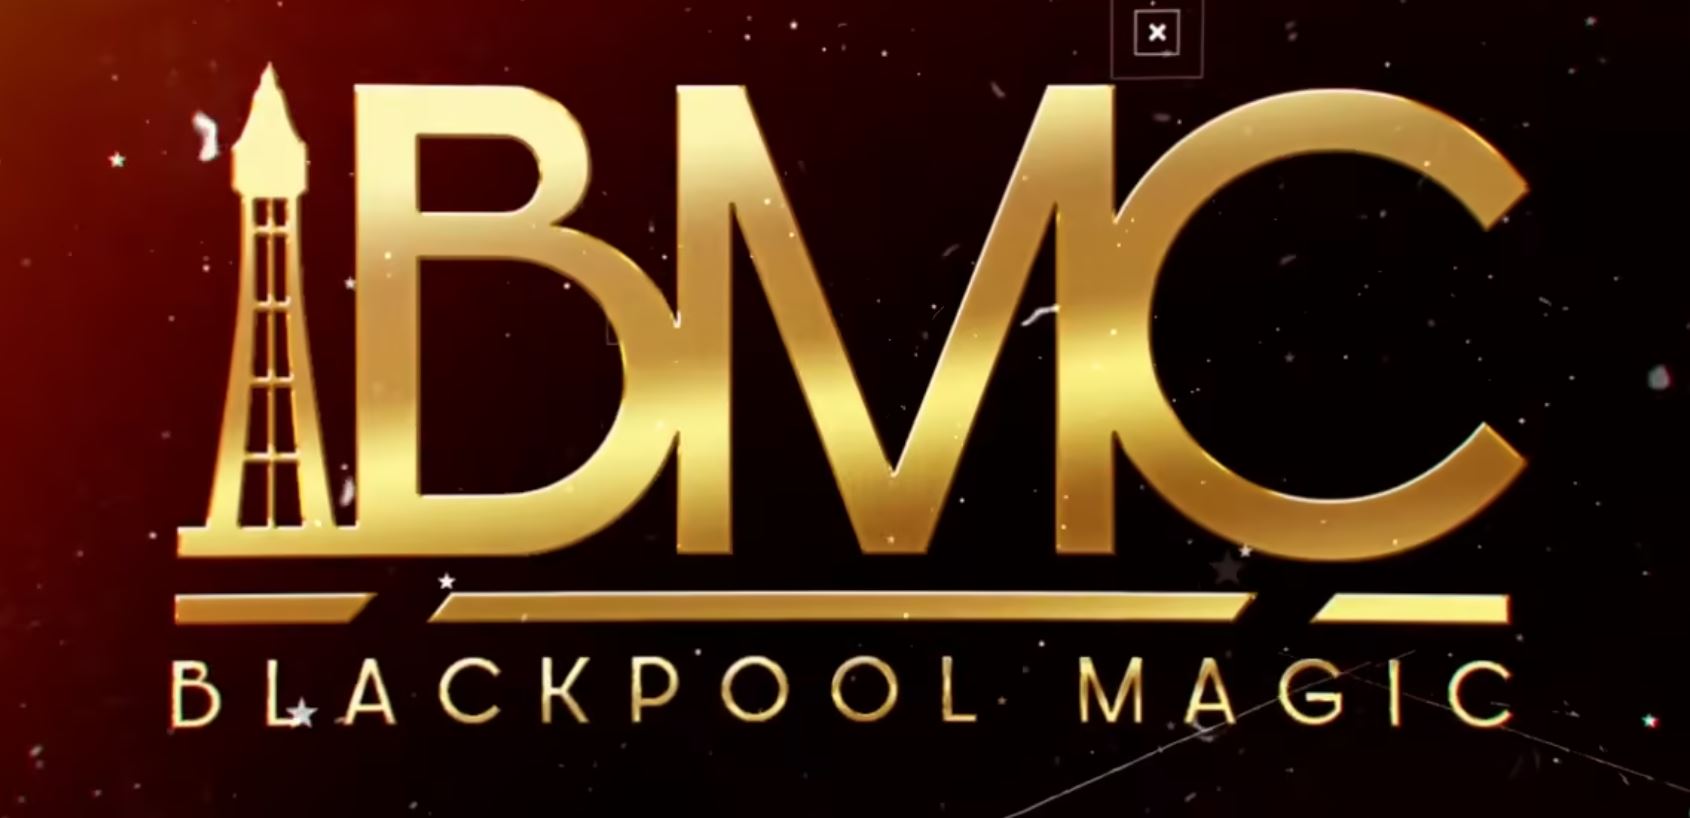 Blackpool Magic Convention • what's on with Live Blackpool